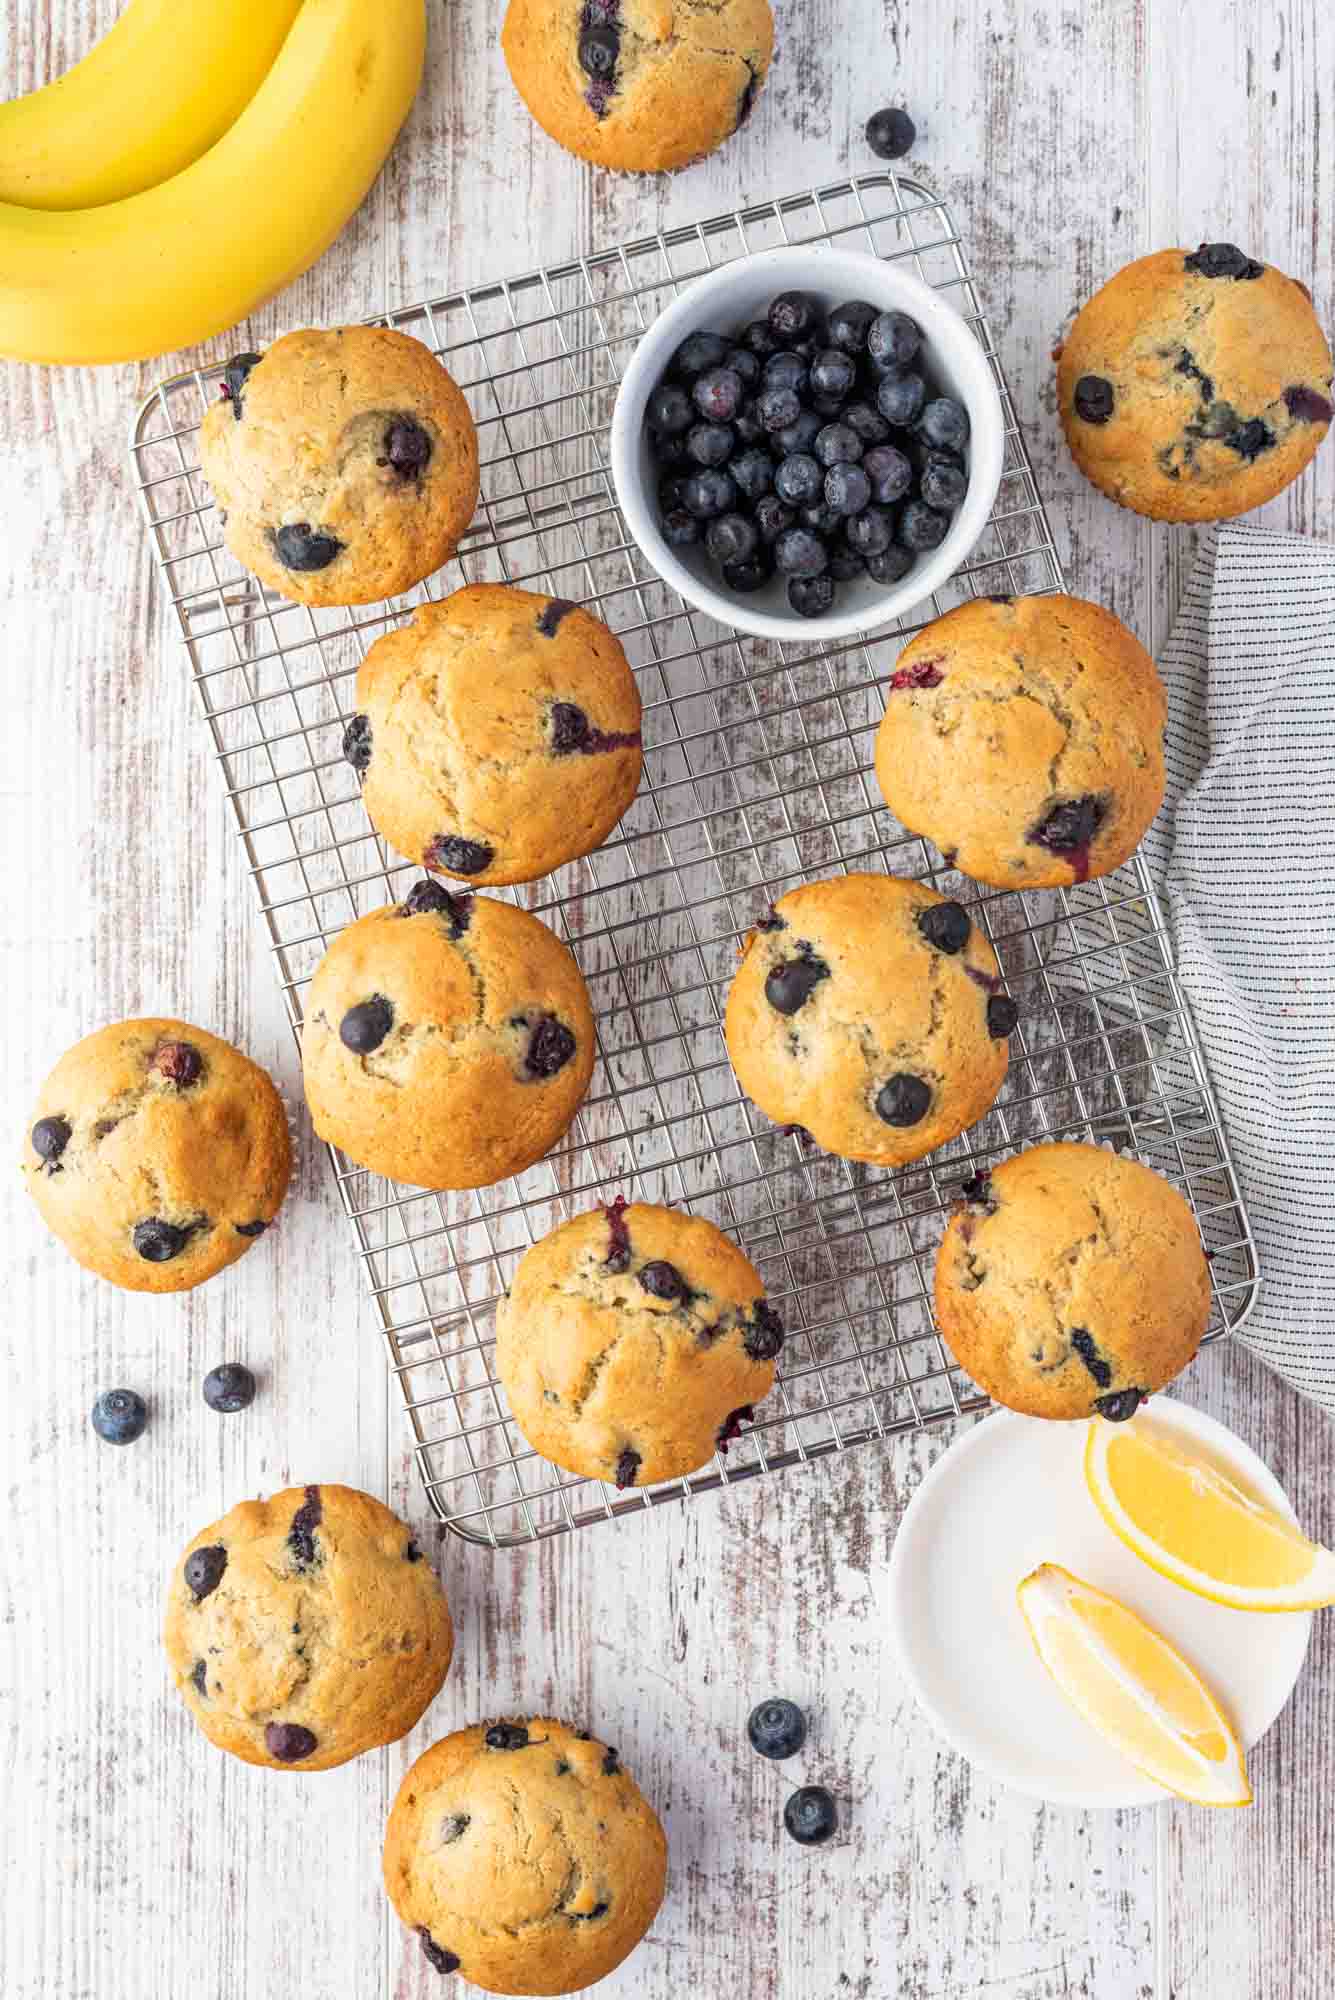 Overhead shot of muffins on a wire rack, with fresh blueberries, lemon wedges, and bananas on the side.